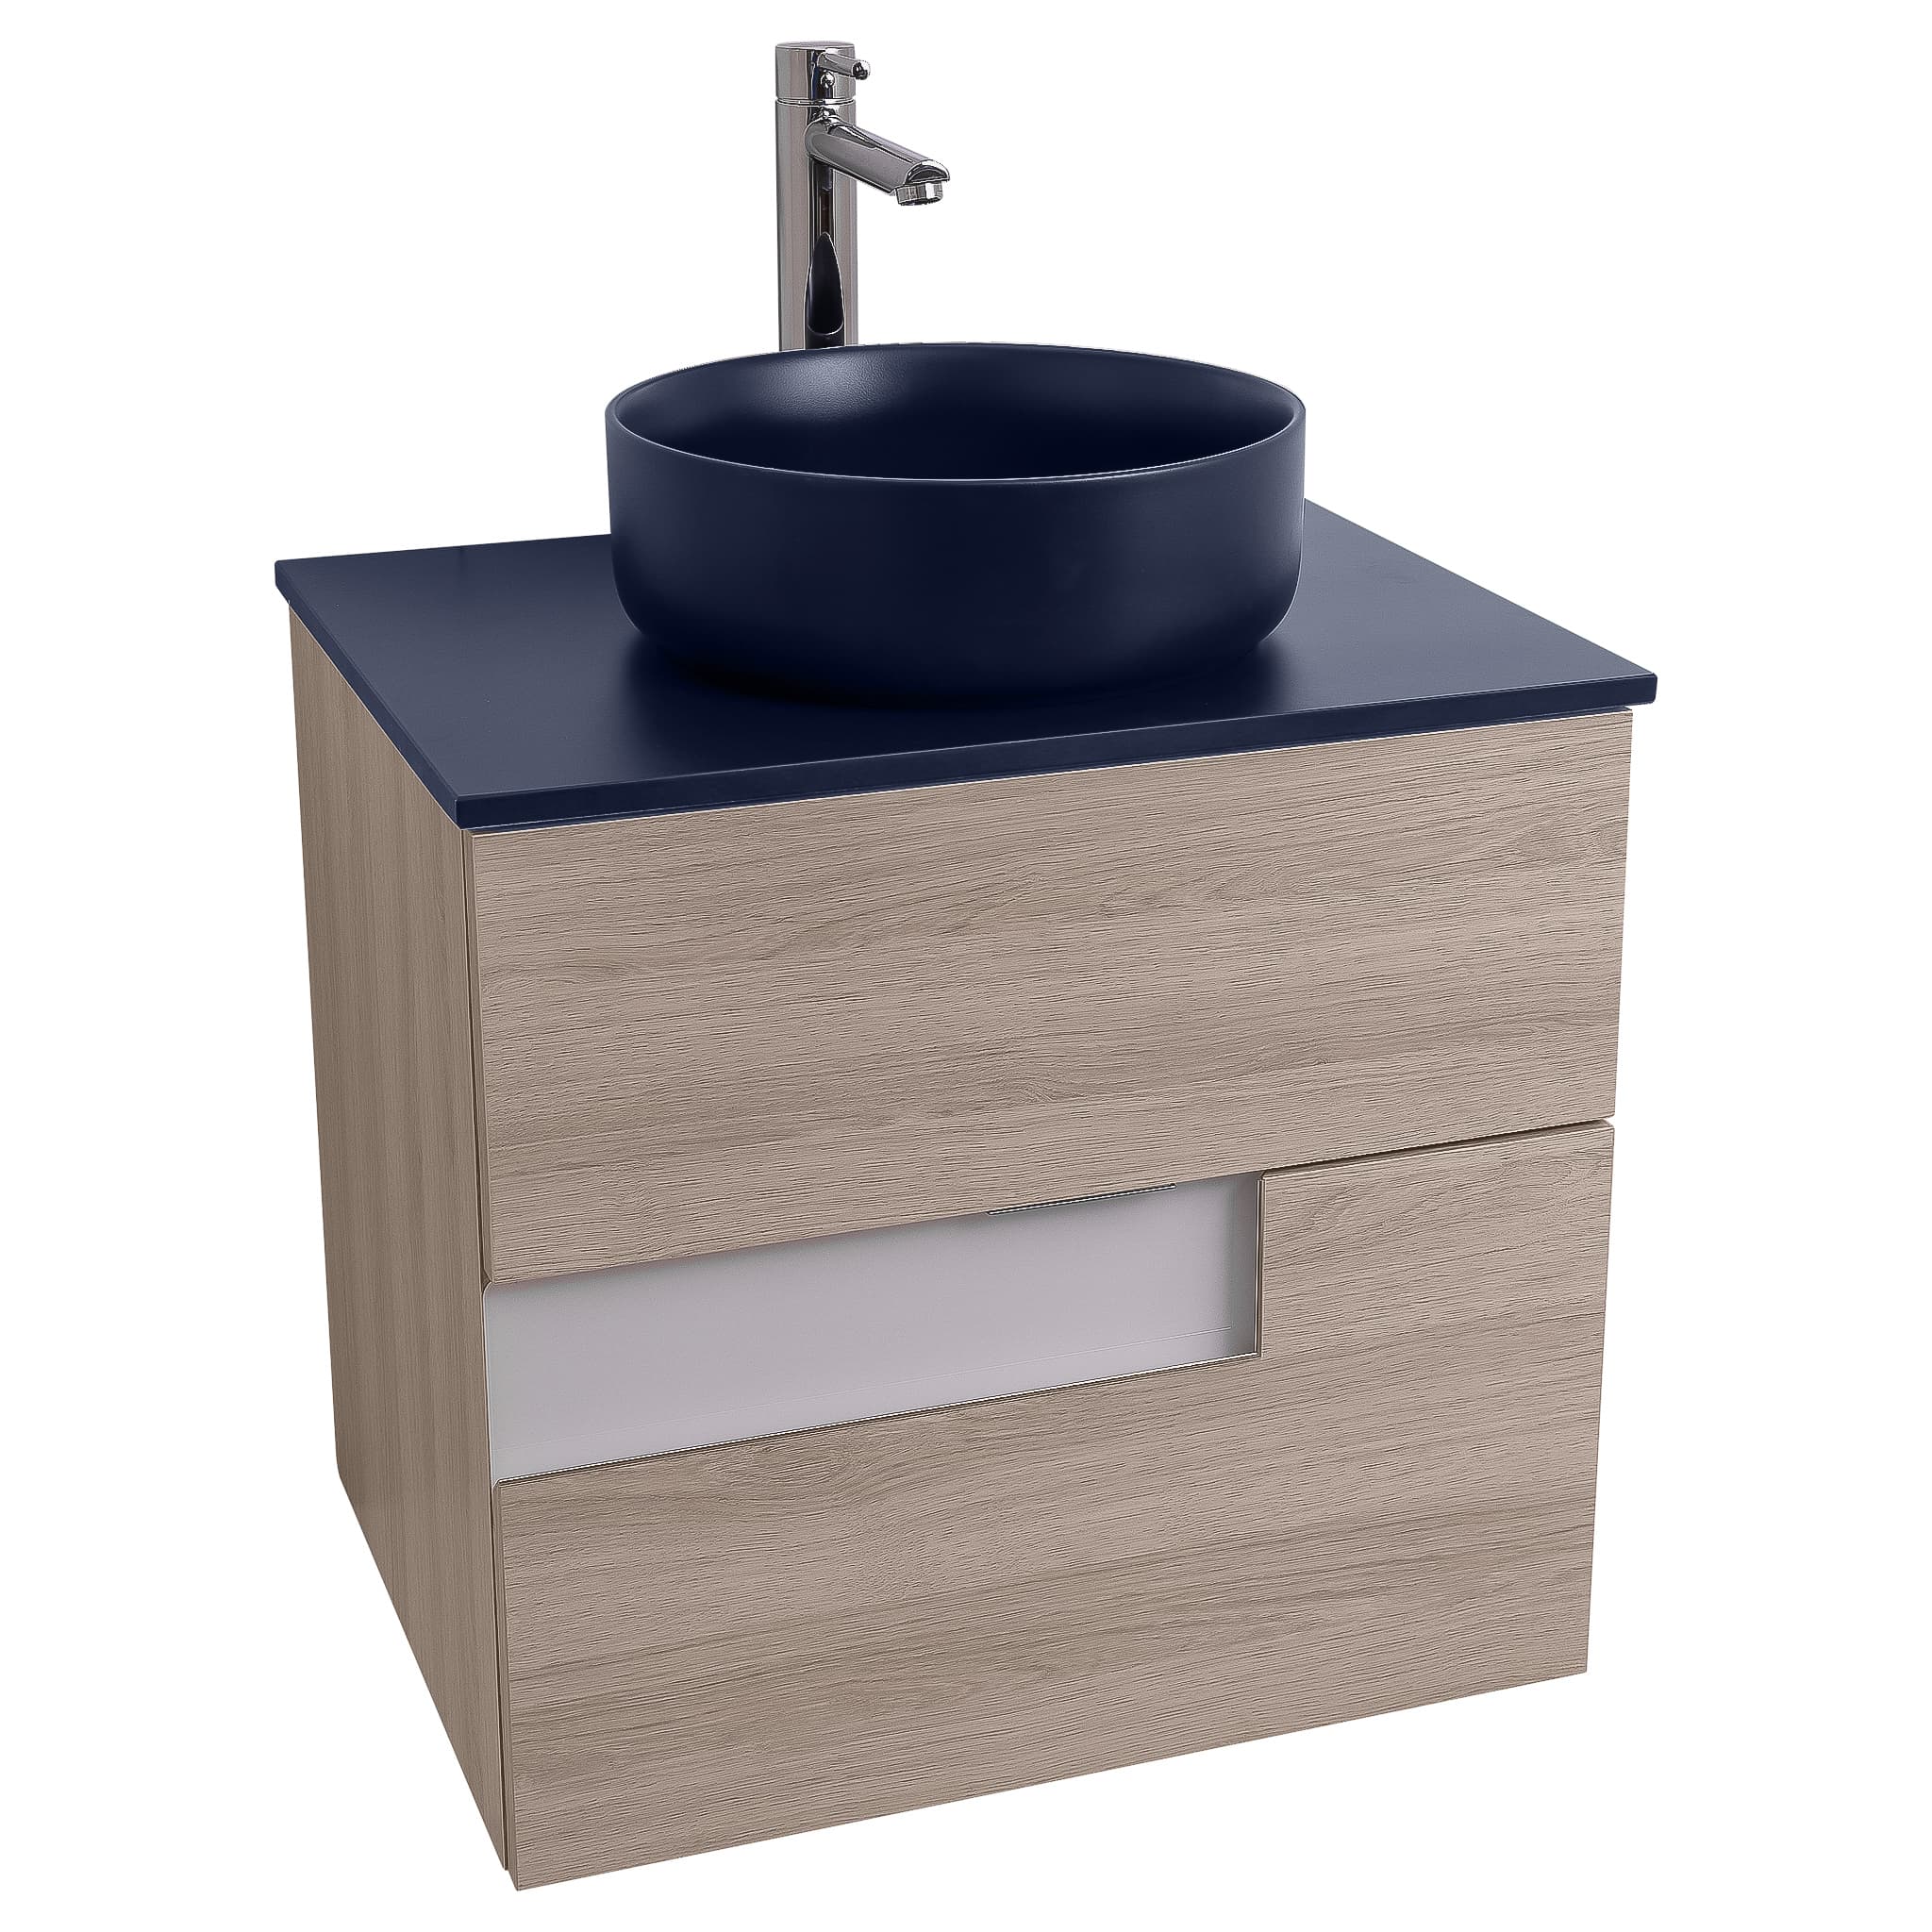 Vision 23.5 Natural Light Wood Cabinet, Ares Navy Blue Top And Ares Navy Blue Ceramic Basin, Wall Mounted Modern Vanity Set